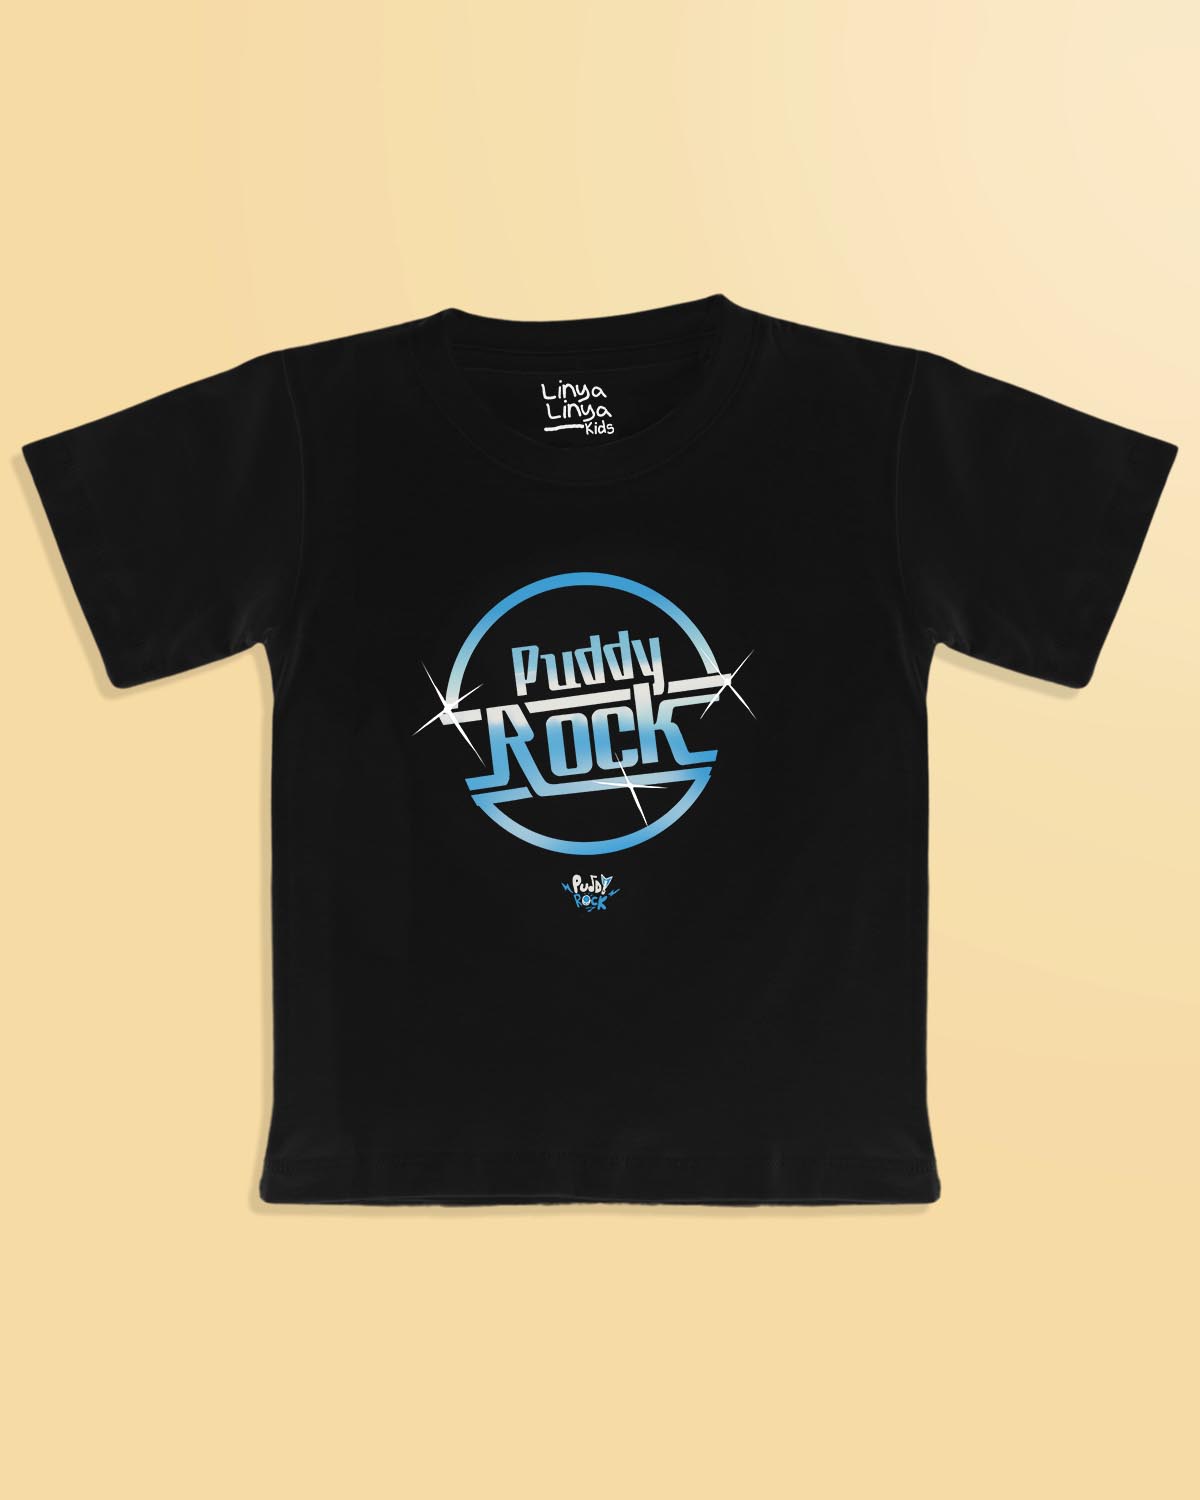 Kids T-Shirt: Puddy Rock (The Strokes)